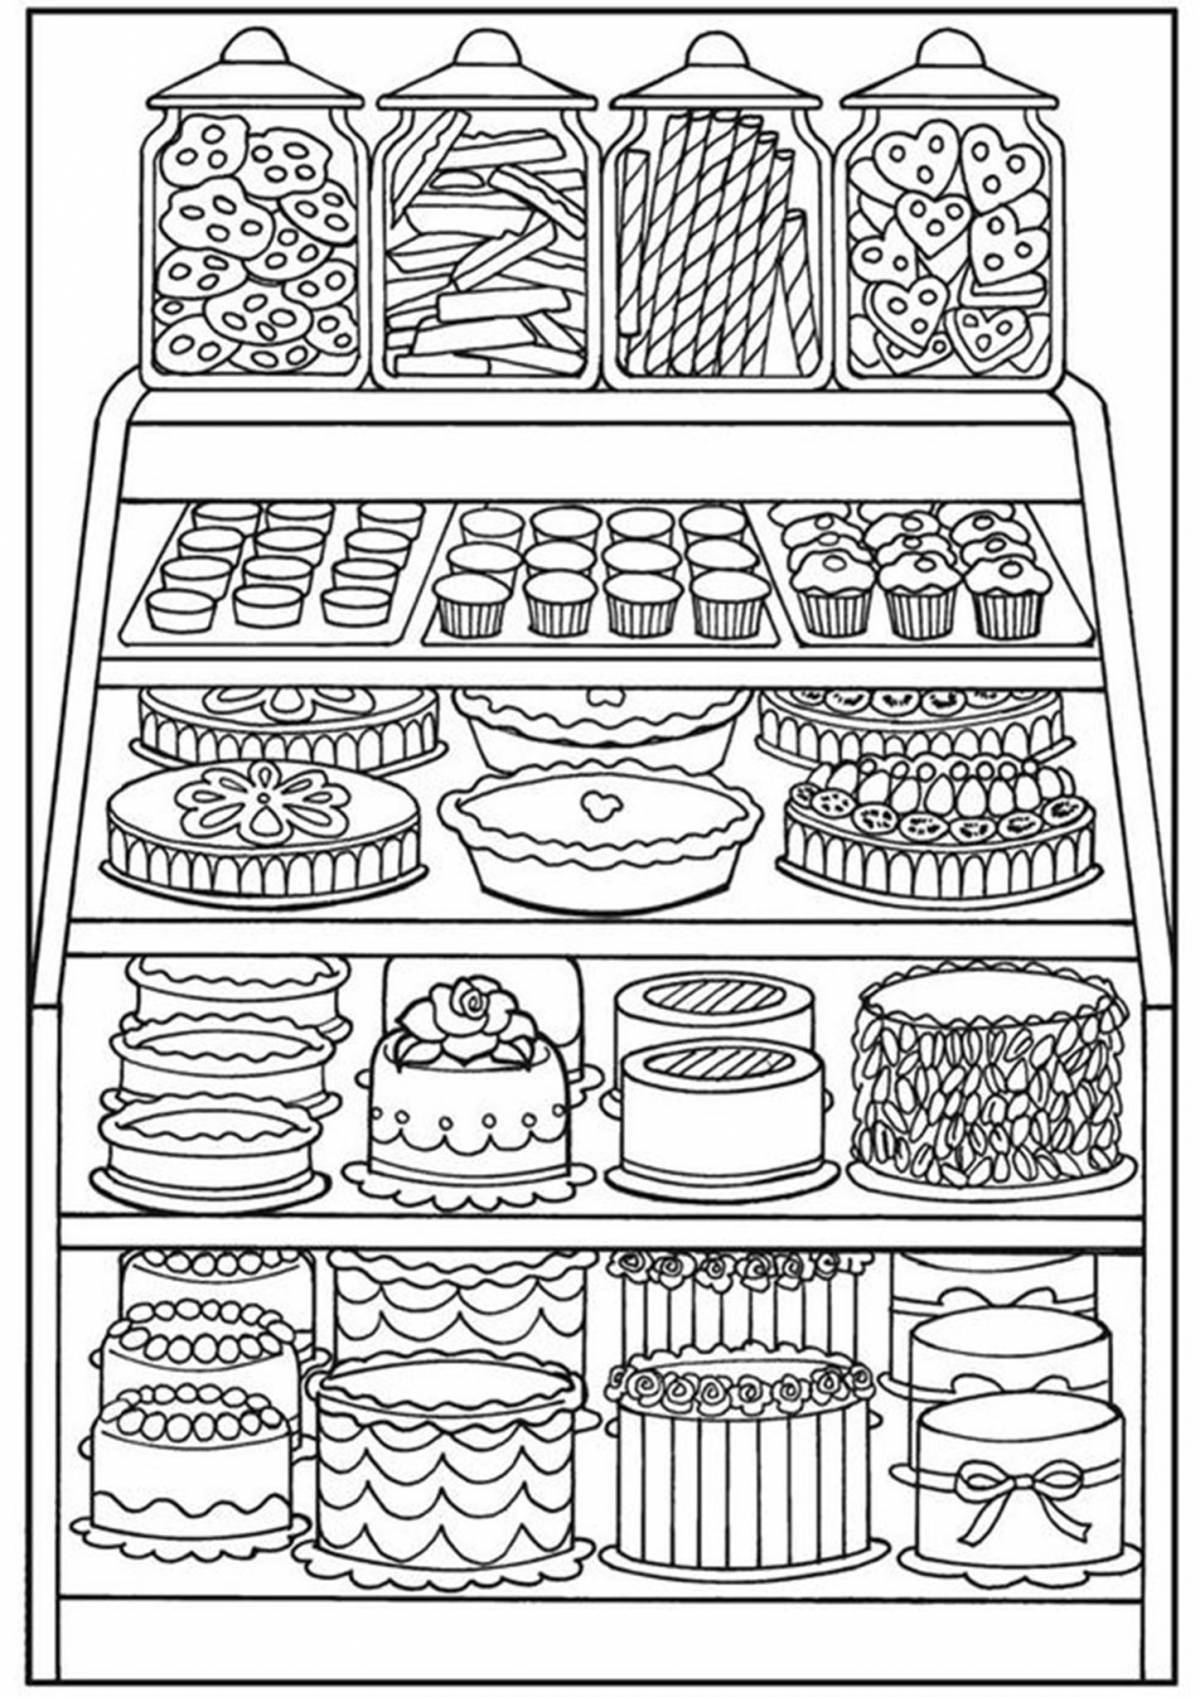 Bright shop magnet coloring page